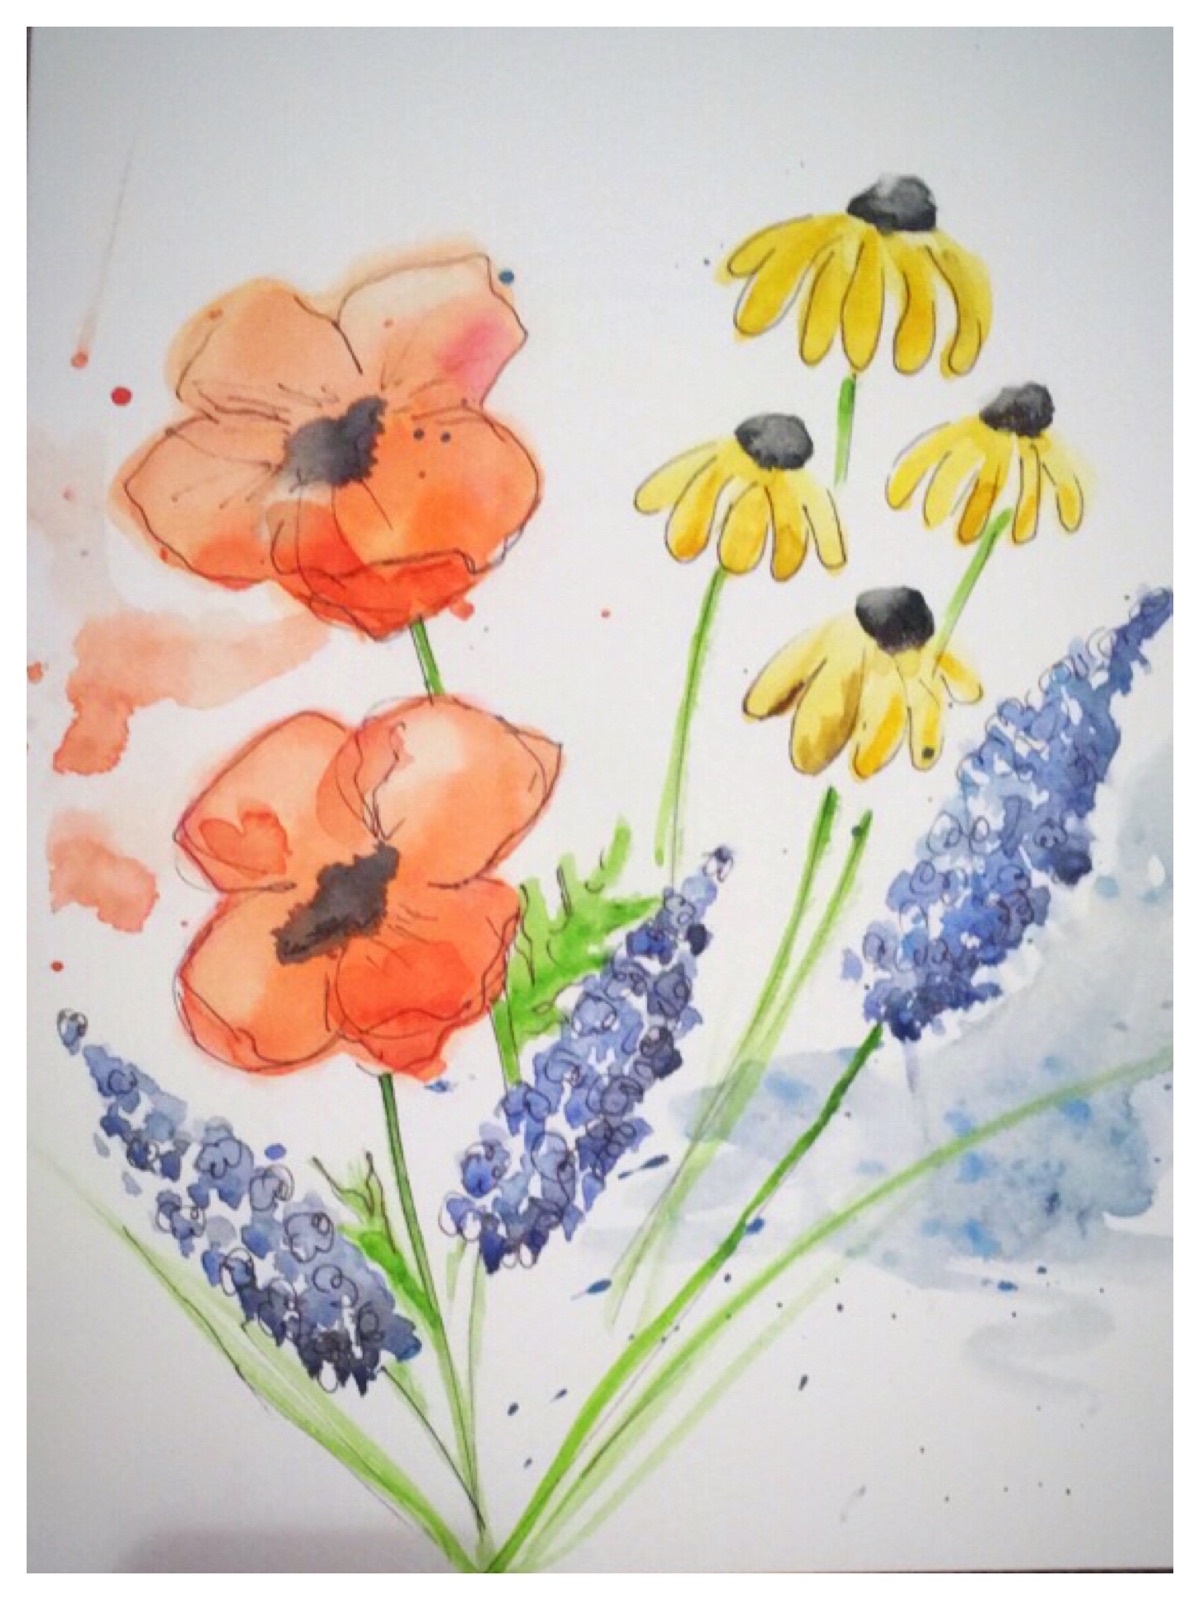 Virtual Watercolor Flowers ~Take Home Kits Available Too!